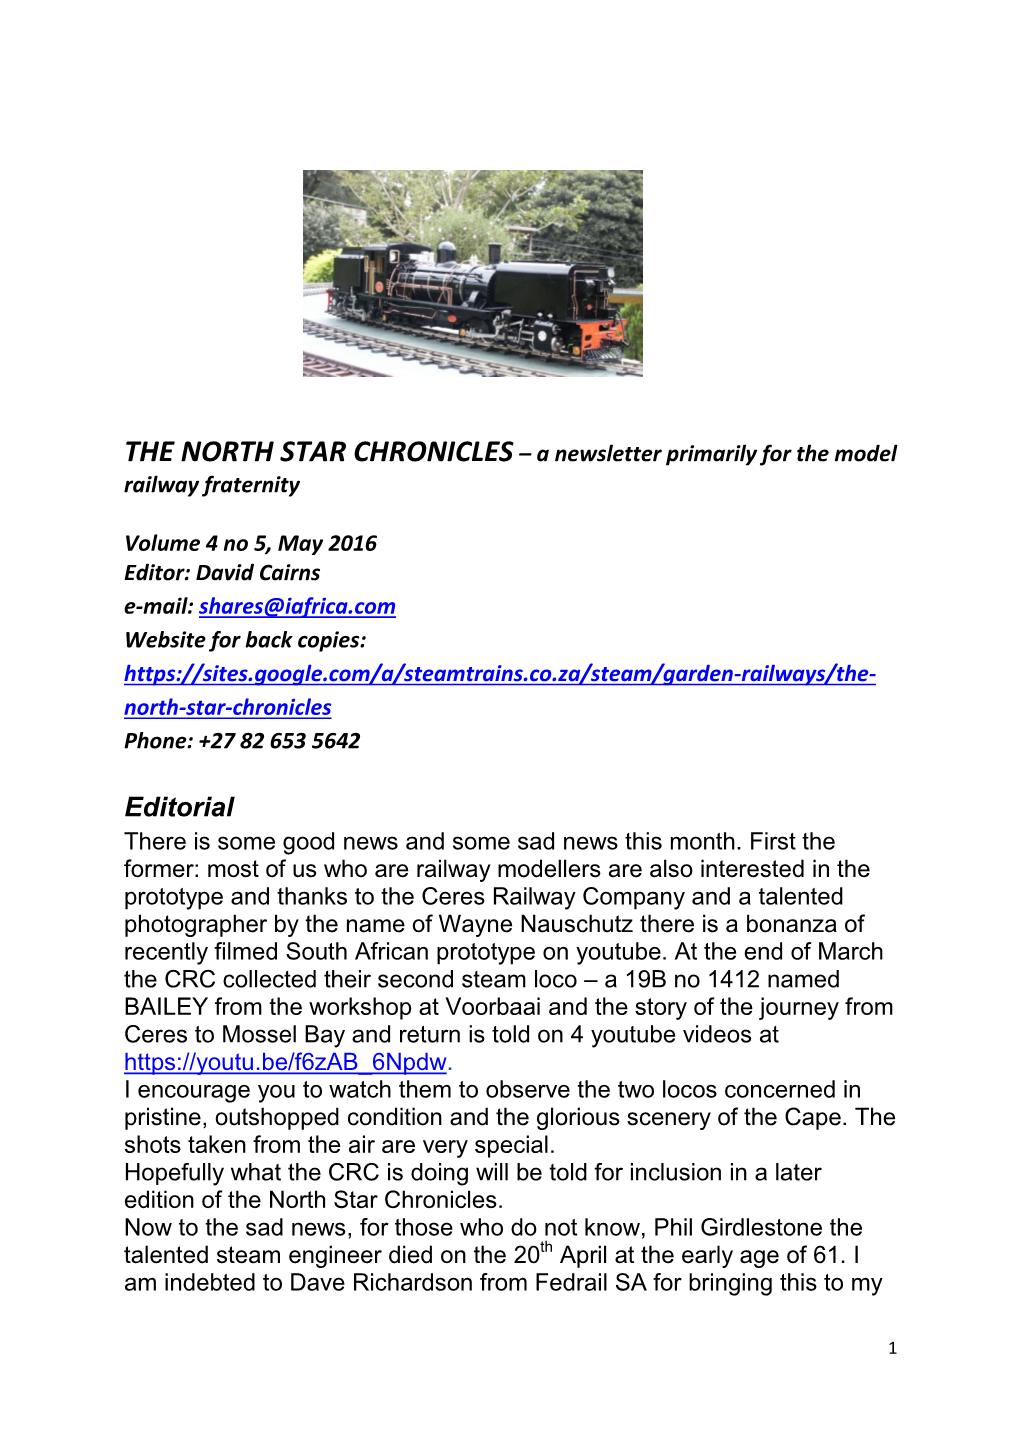 A Newsletter Primarily for the Model Railway Fraternity